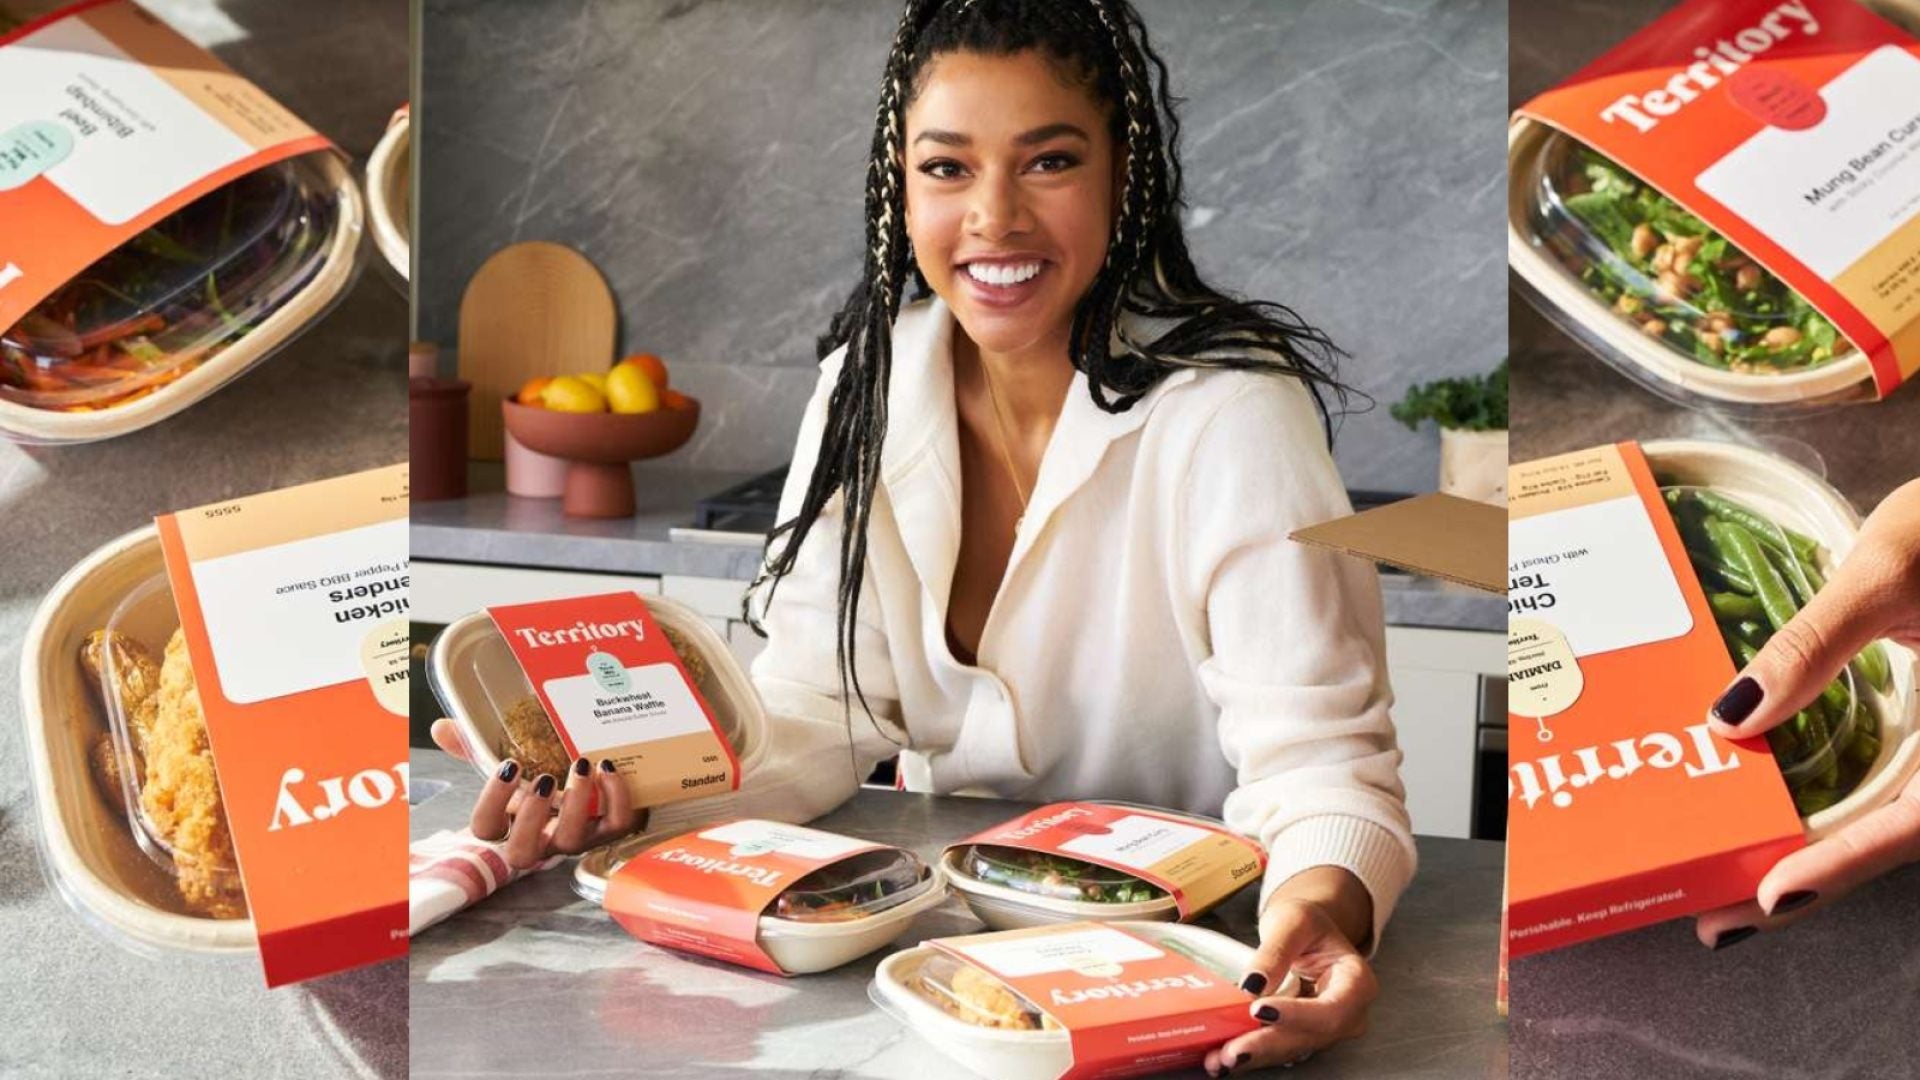 'Meals For Mama': Hannah Bronfman And Territory Foods Deliver Healthy, Delicious Meals For Expecting And Postpartum Moms